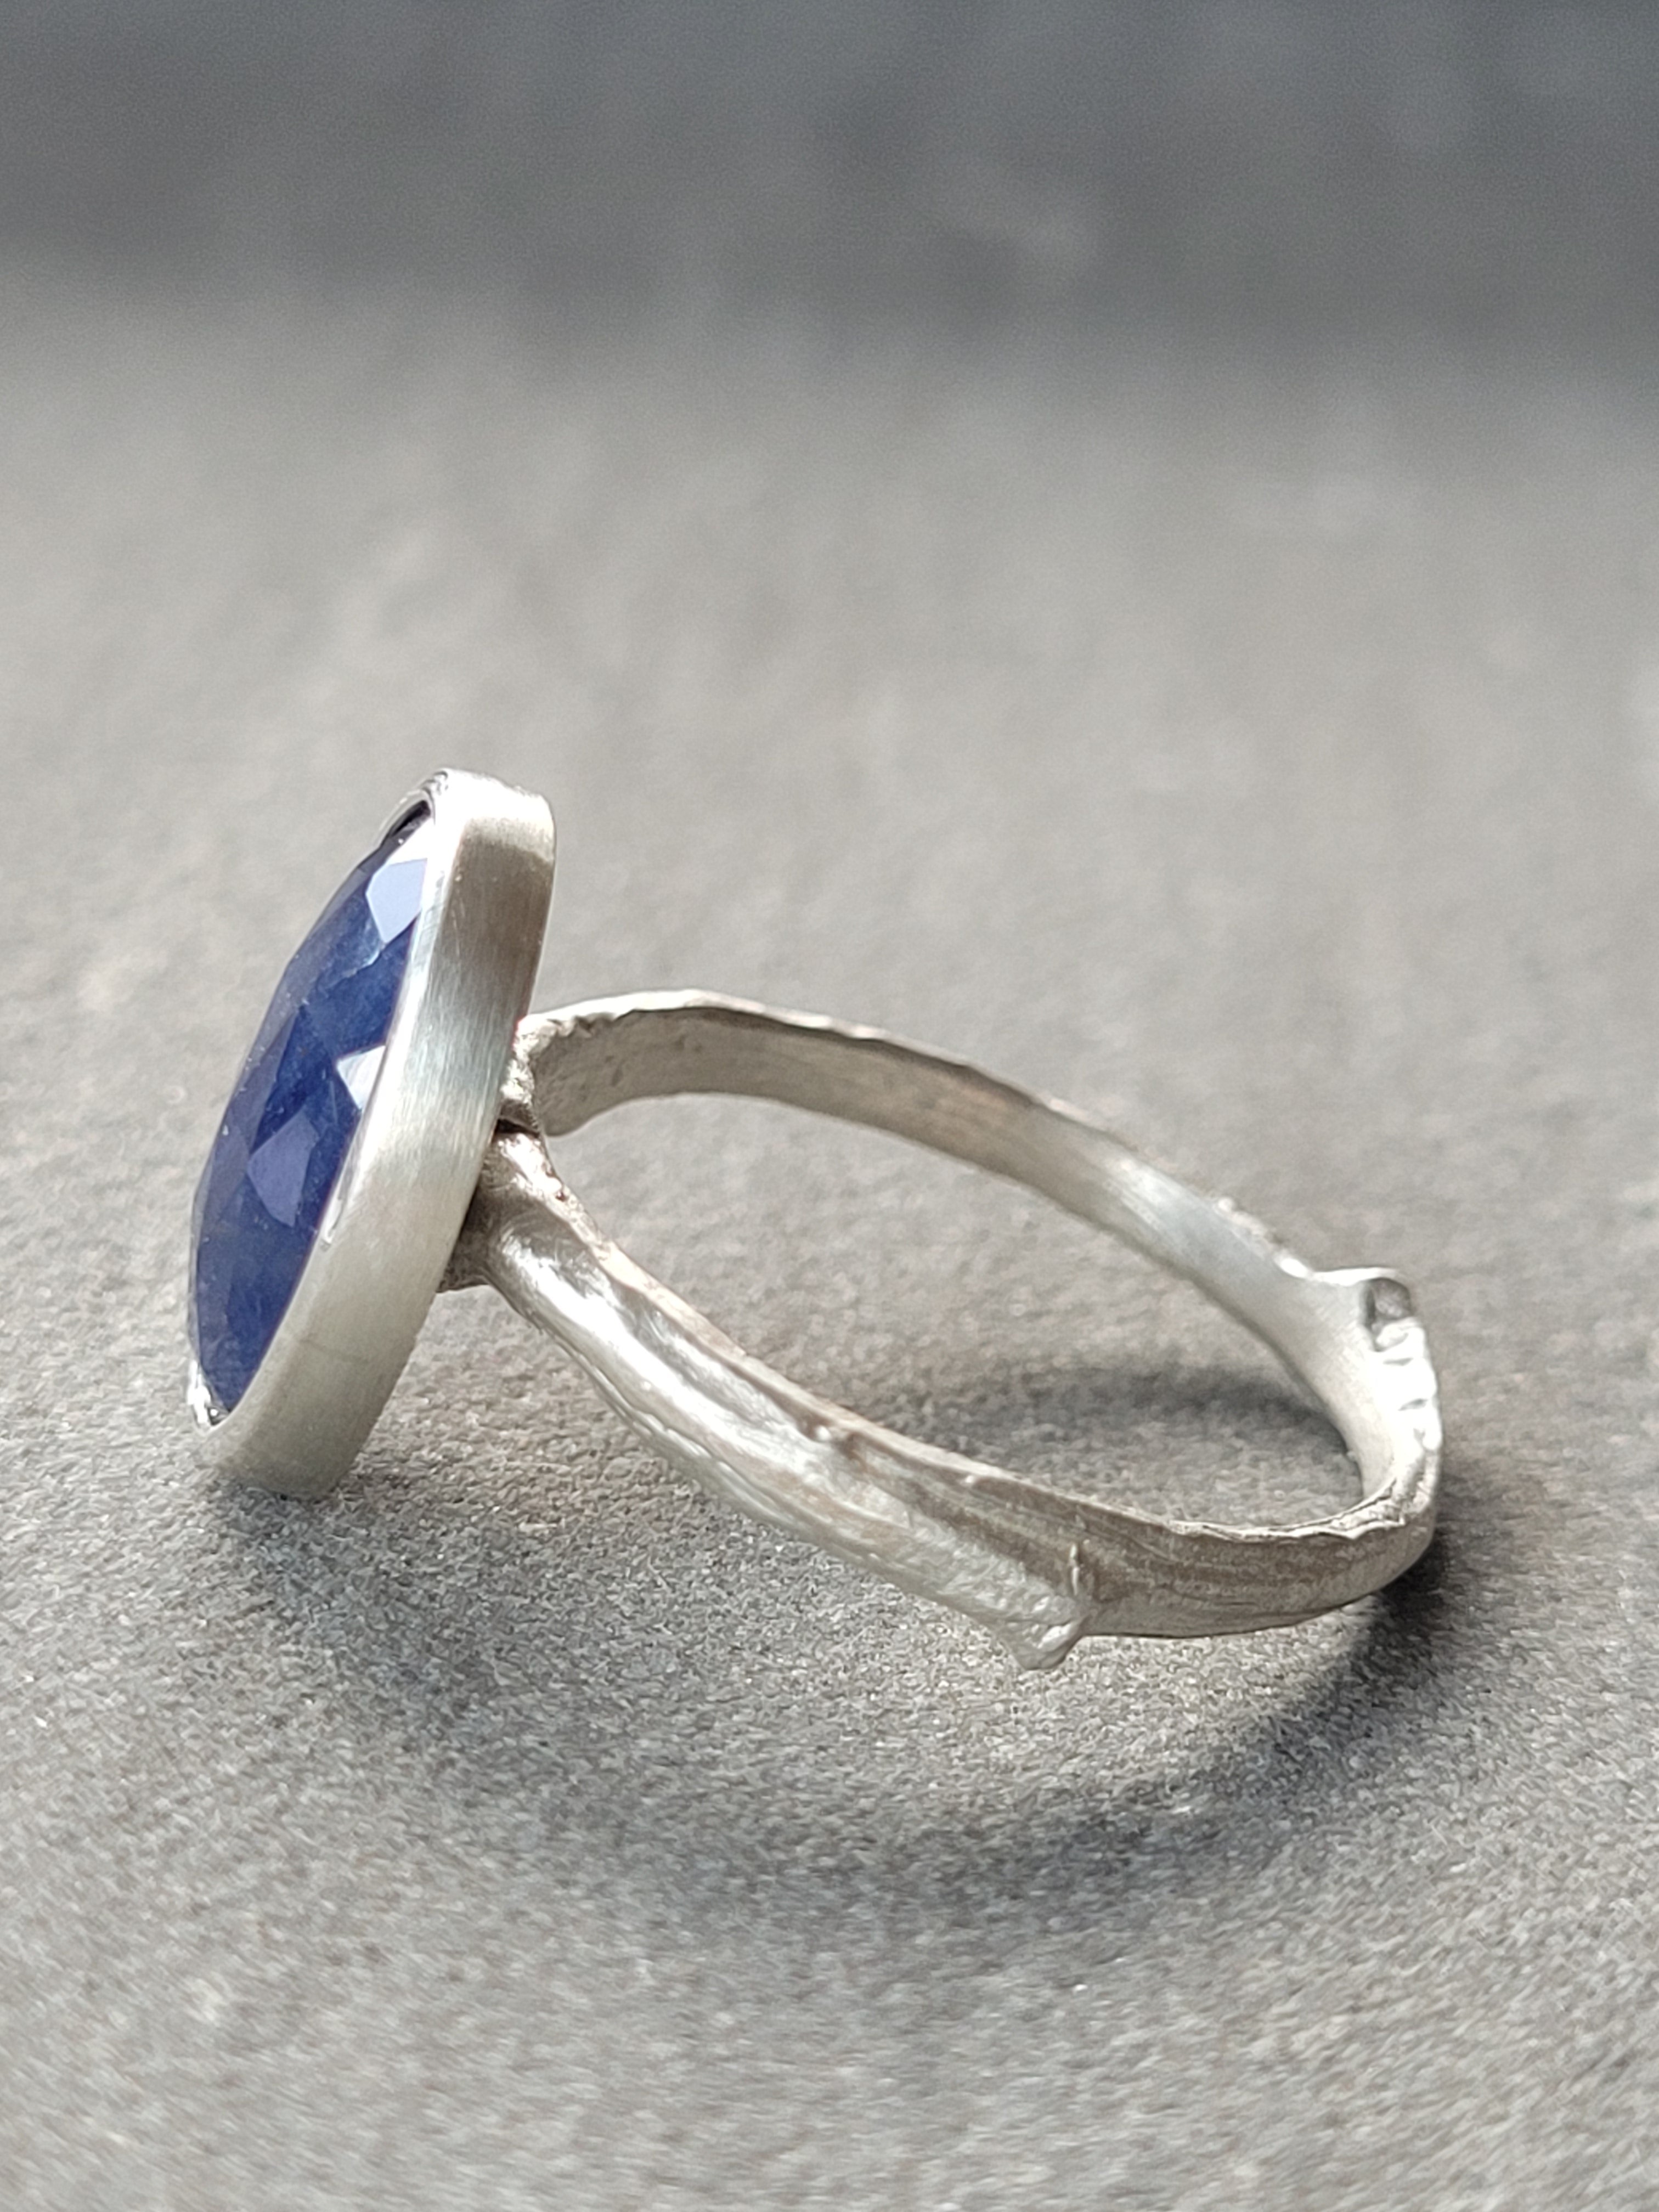 Rose cut Blue Sapphire ring in Sterling Silver